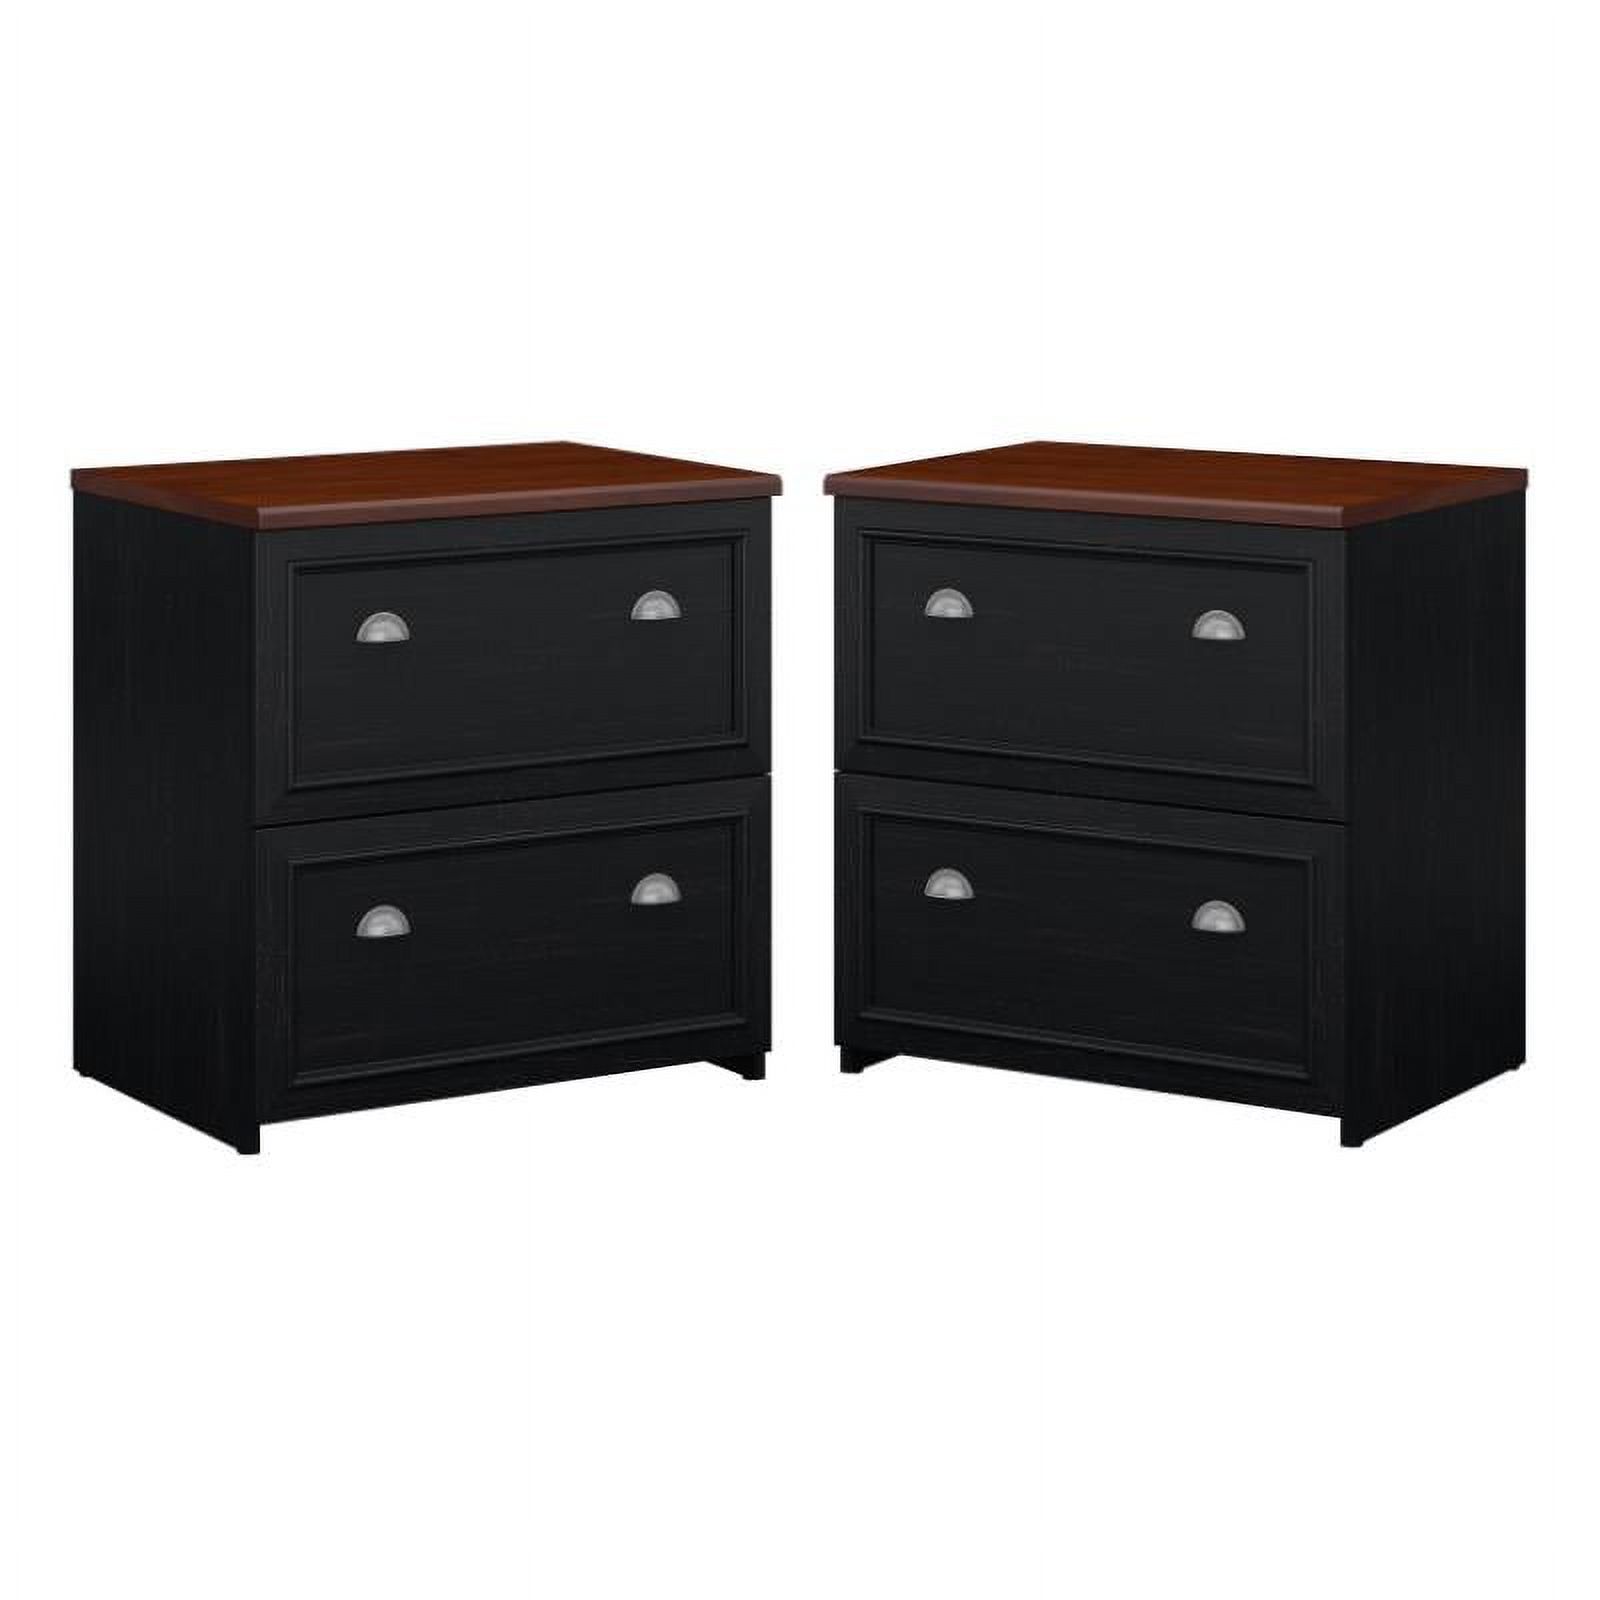 Home Square 2 Piece Engineered Wood Filing Cabinet Set in Antique Black - image 1 of 7